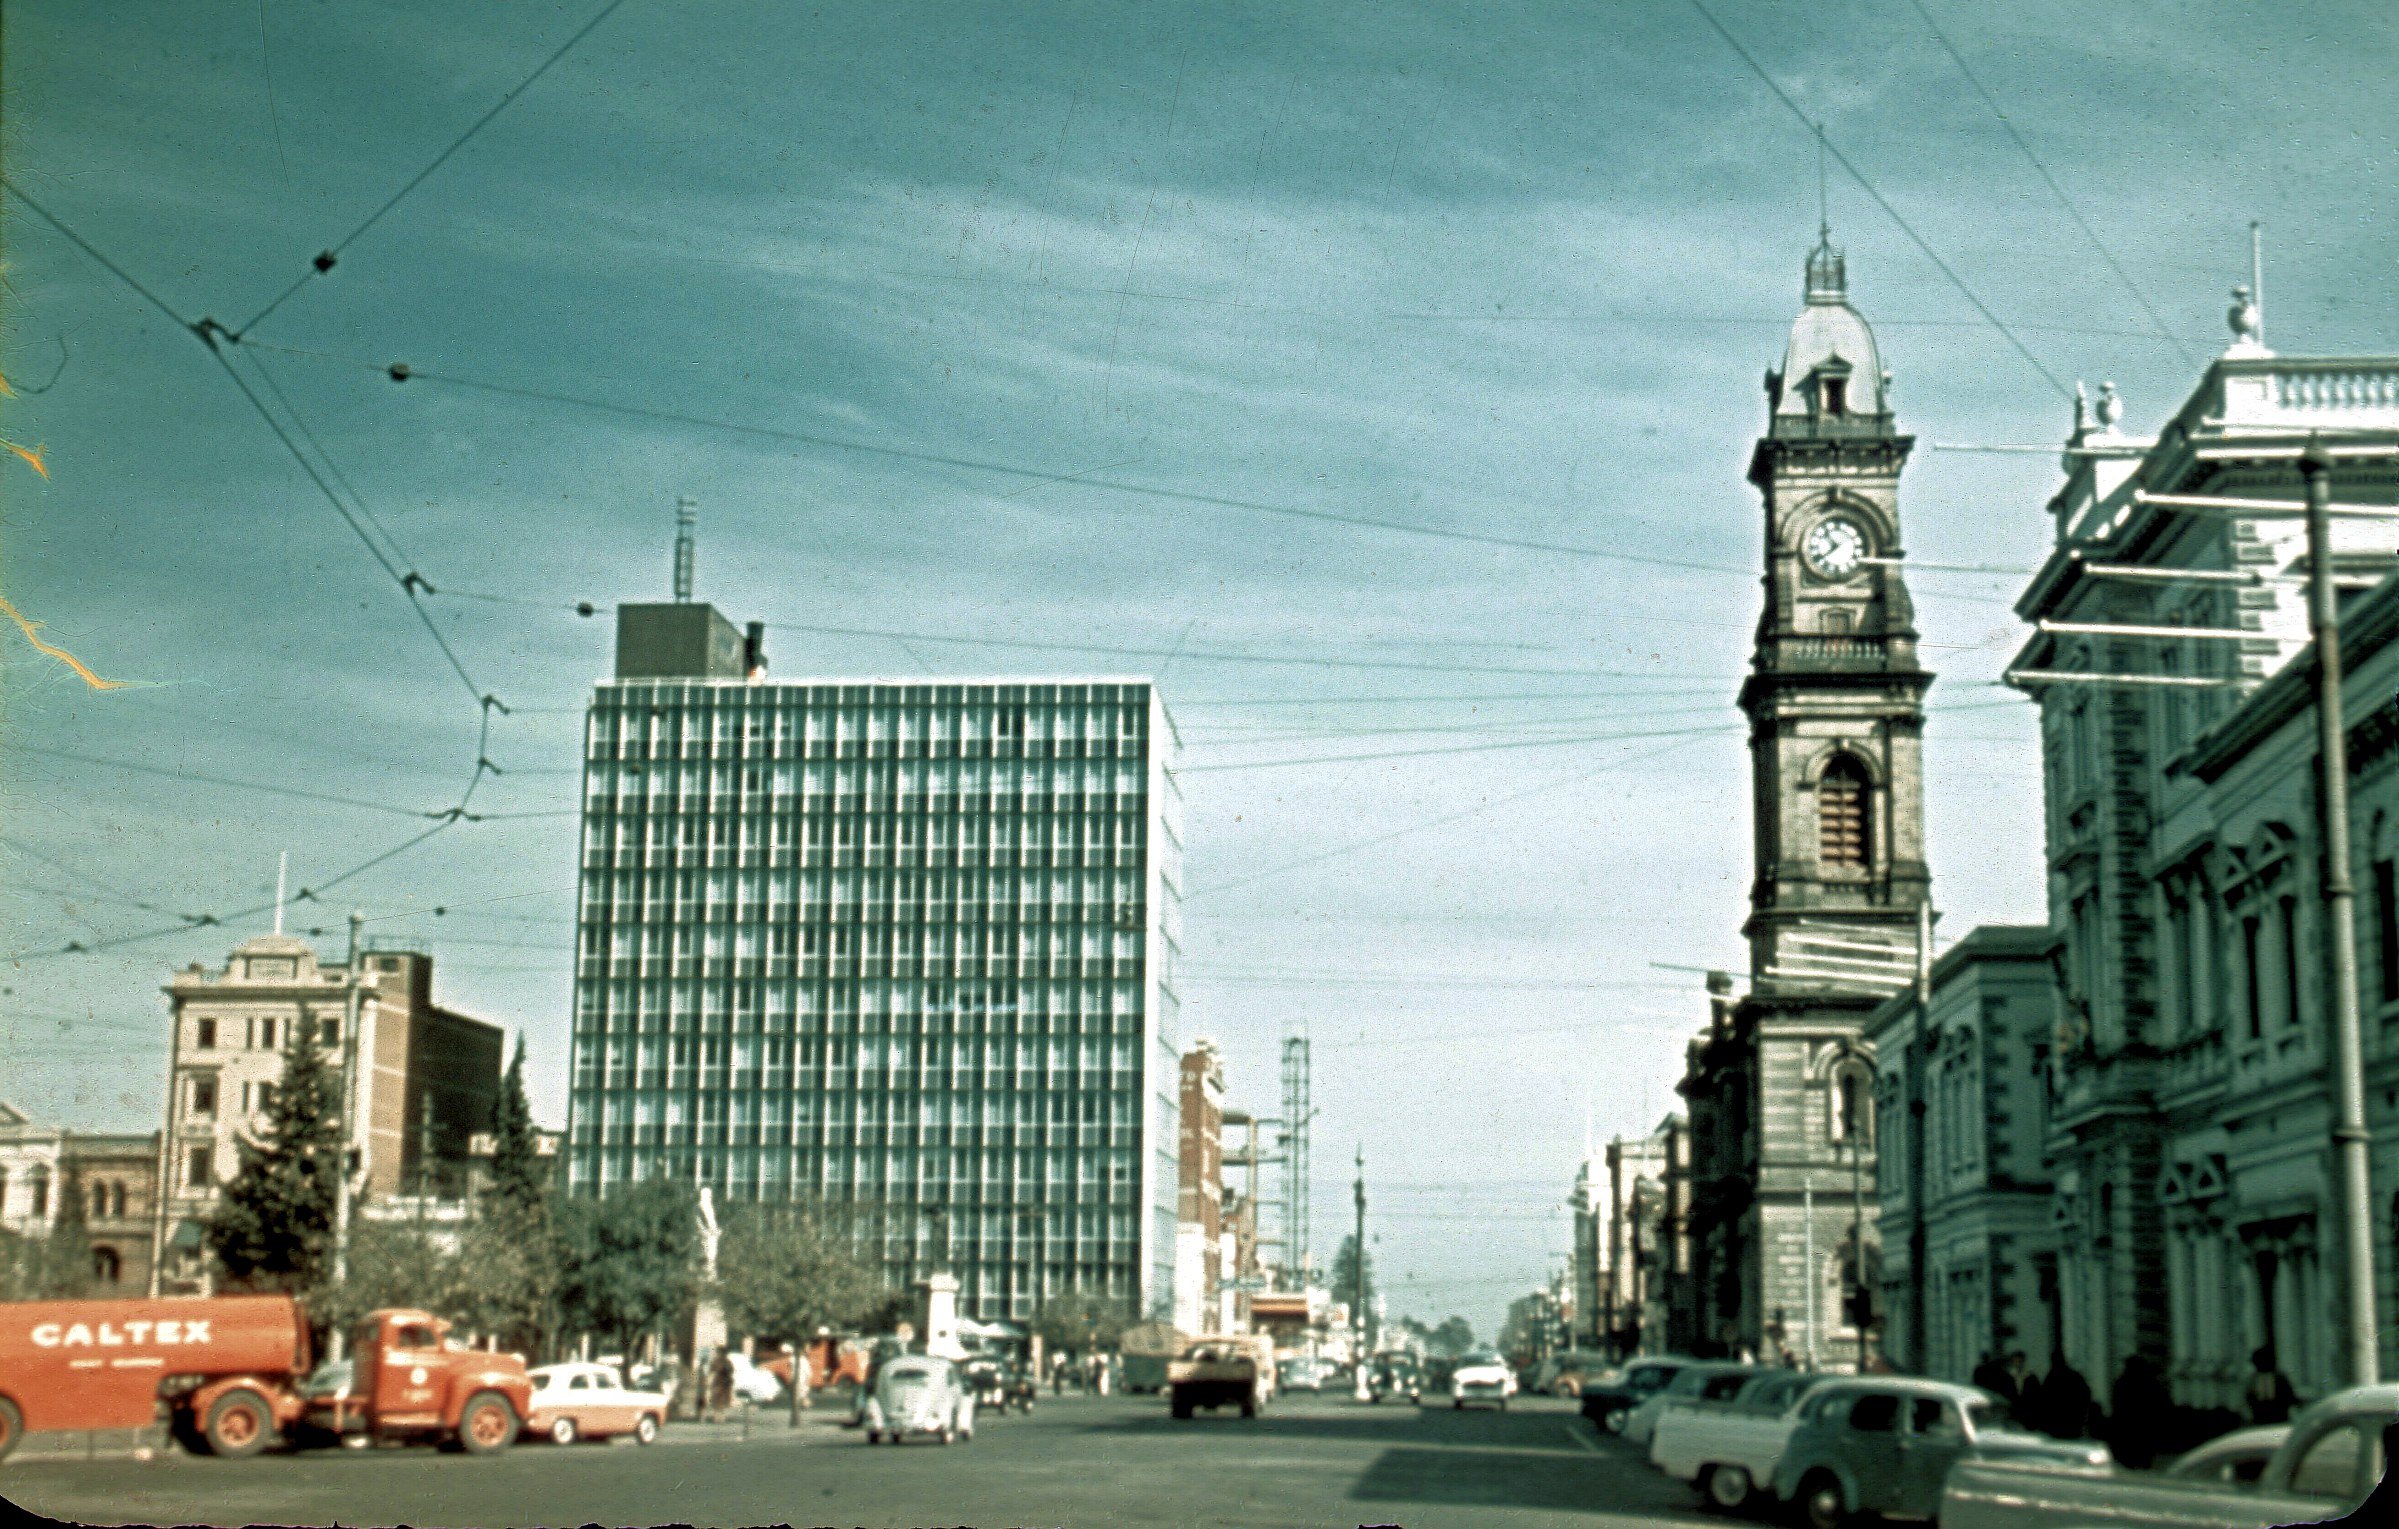 1961 0044 - Frankin Street from Victoria Square, Adelaide, SA.jpg